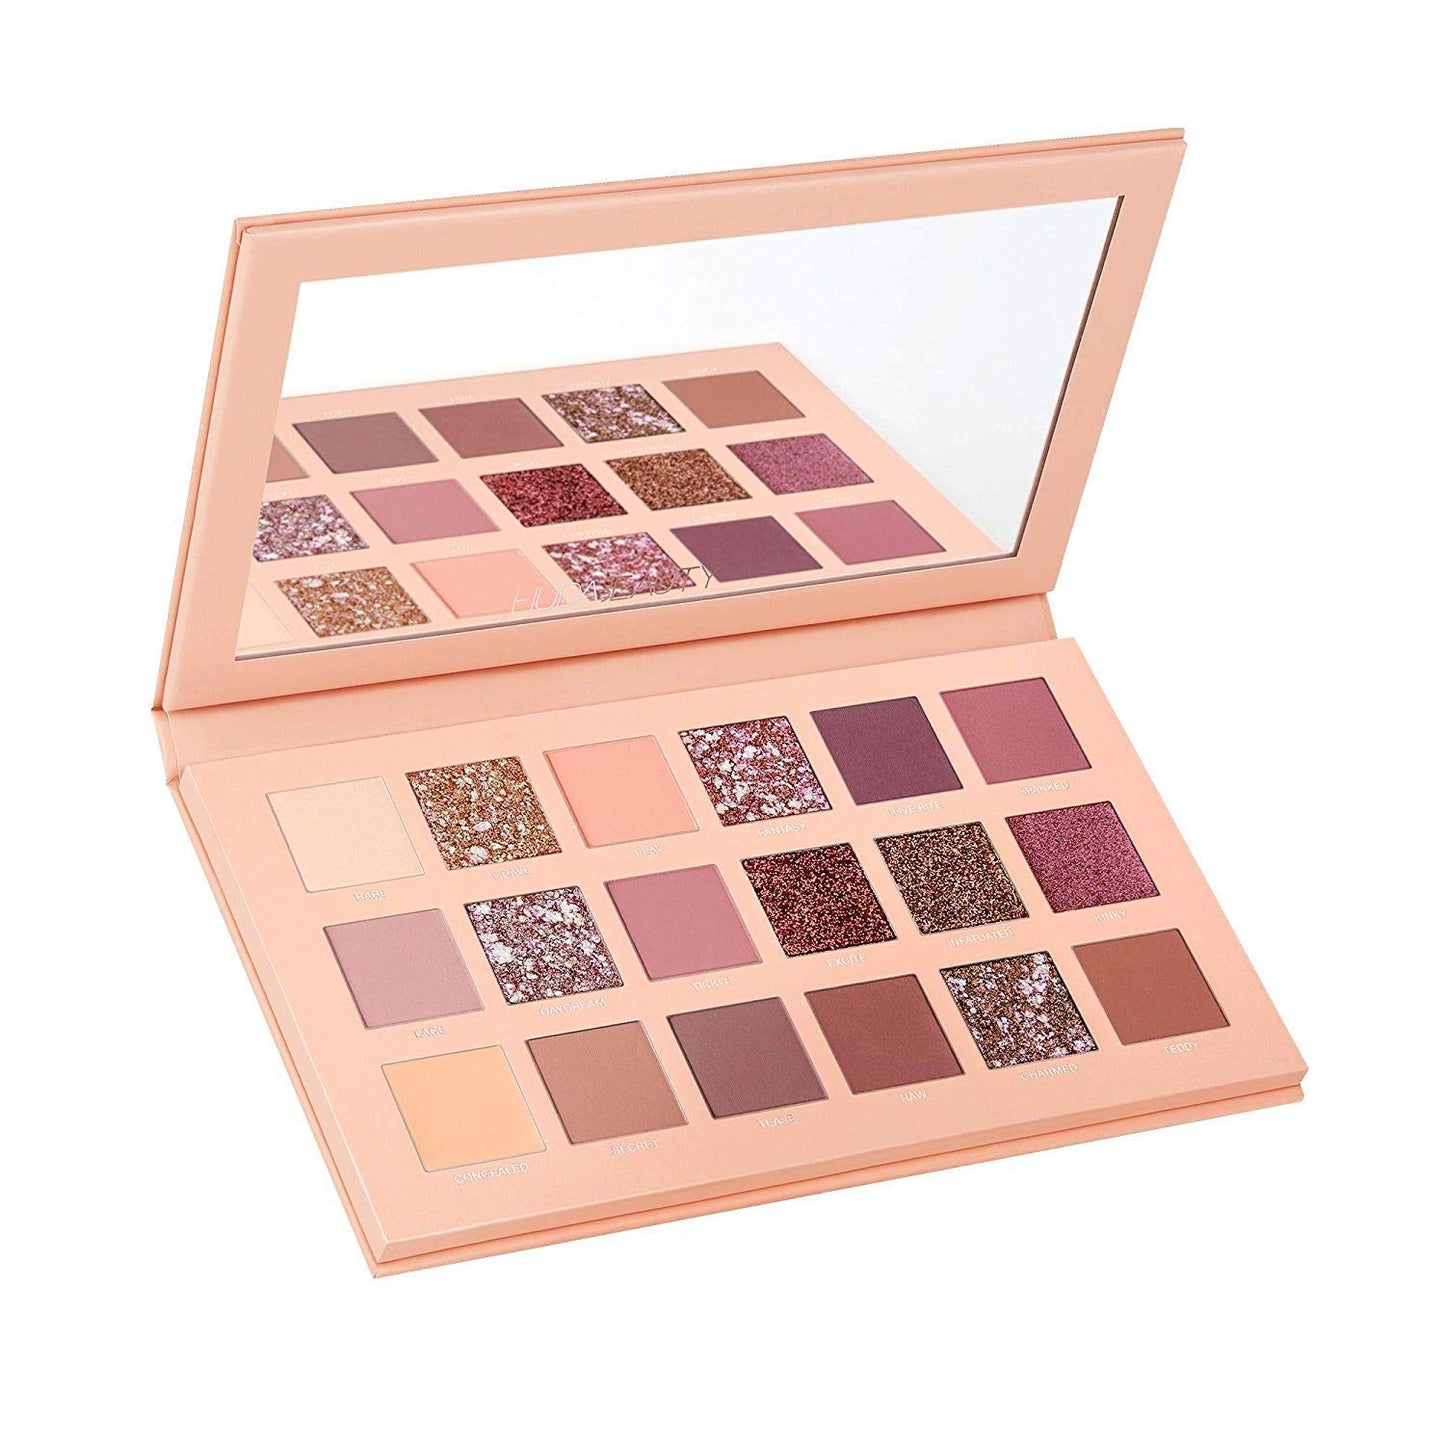 ClubBeauty New Nude Edition Eyeshadow Palette 18 (Multi Color) Shimmery Finish 